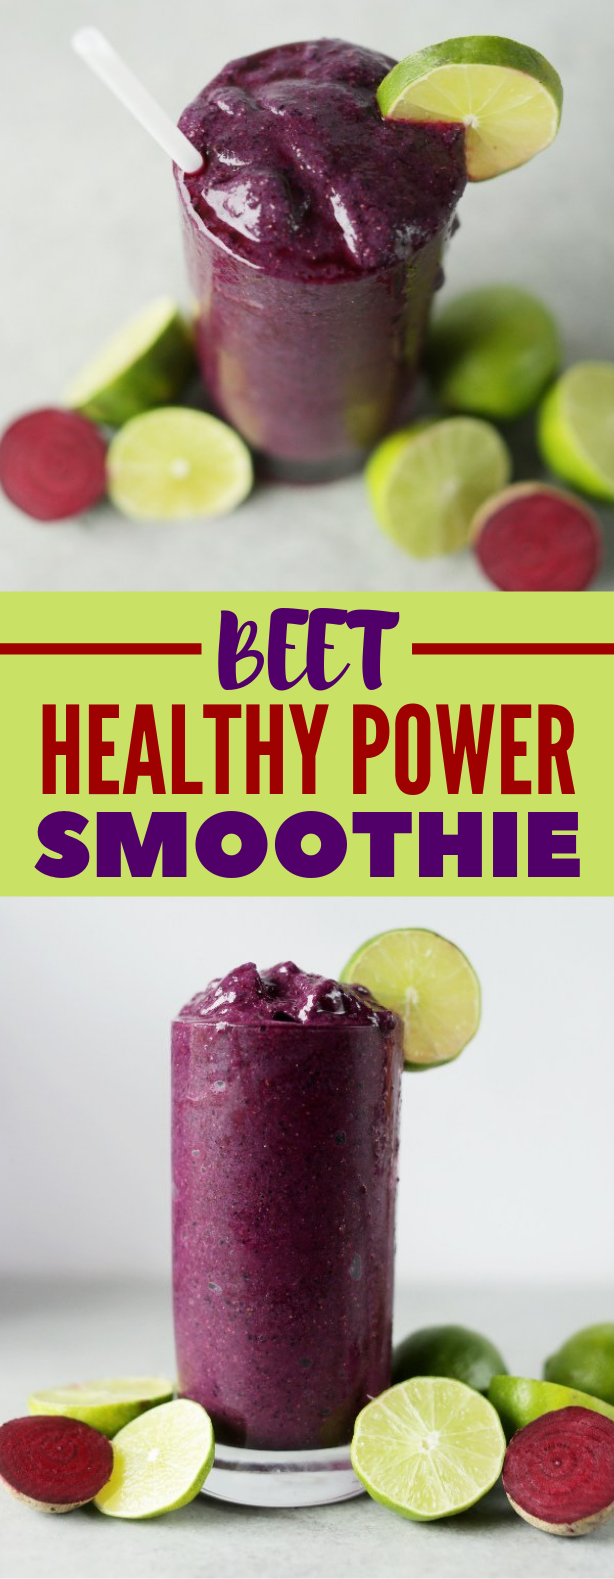 BEET THE COLD POWER SMOOTHIE #drinks #healthydrink